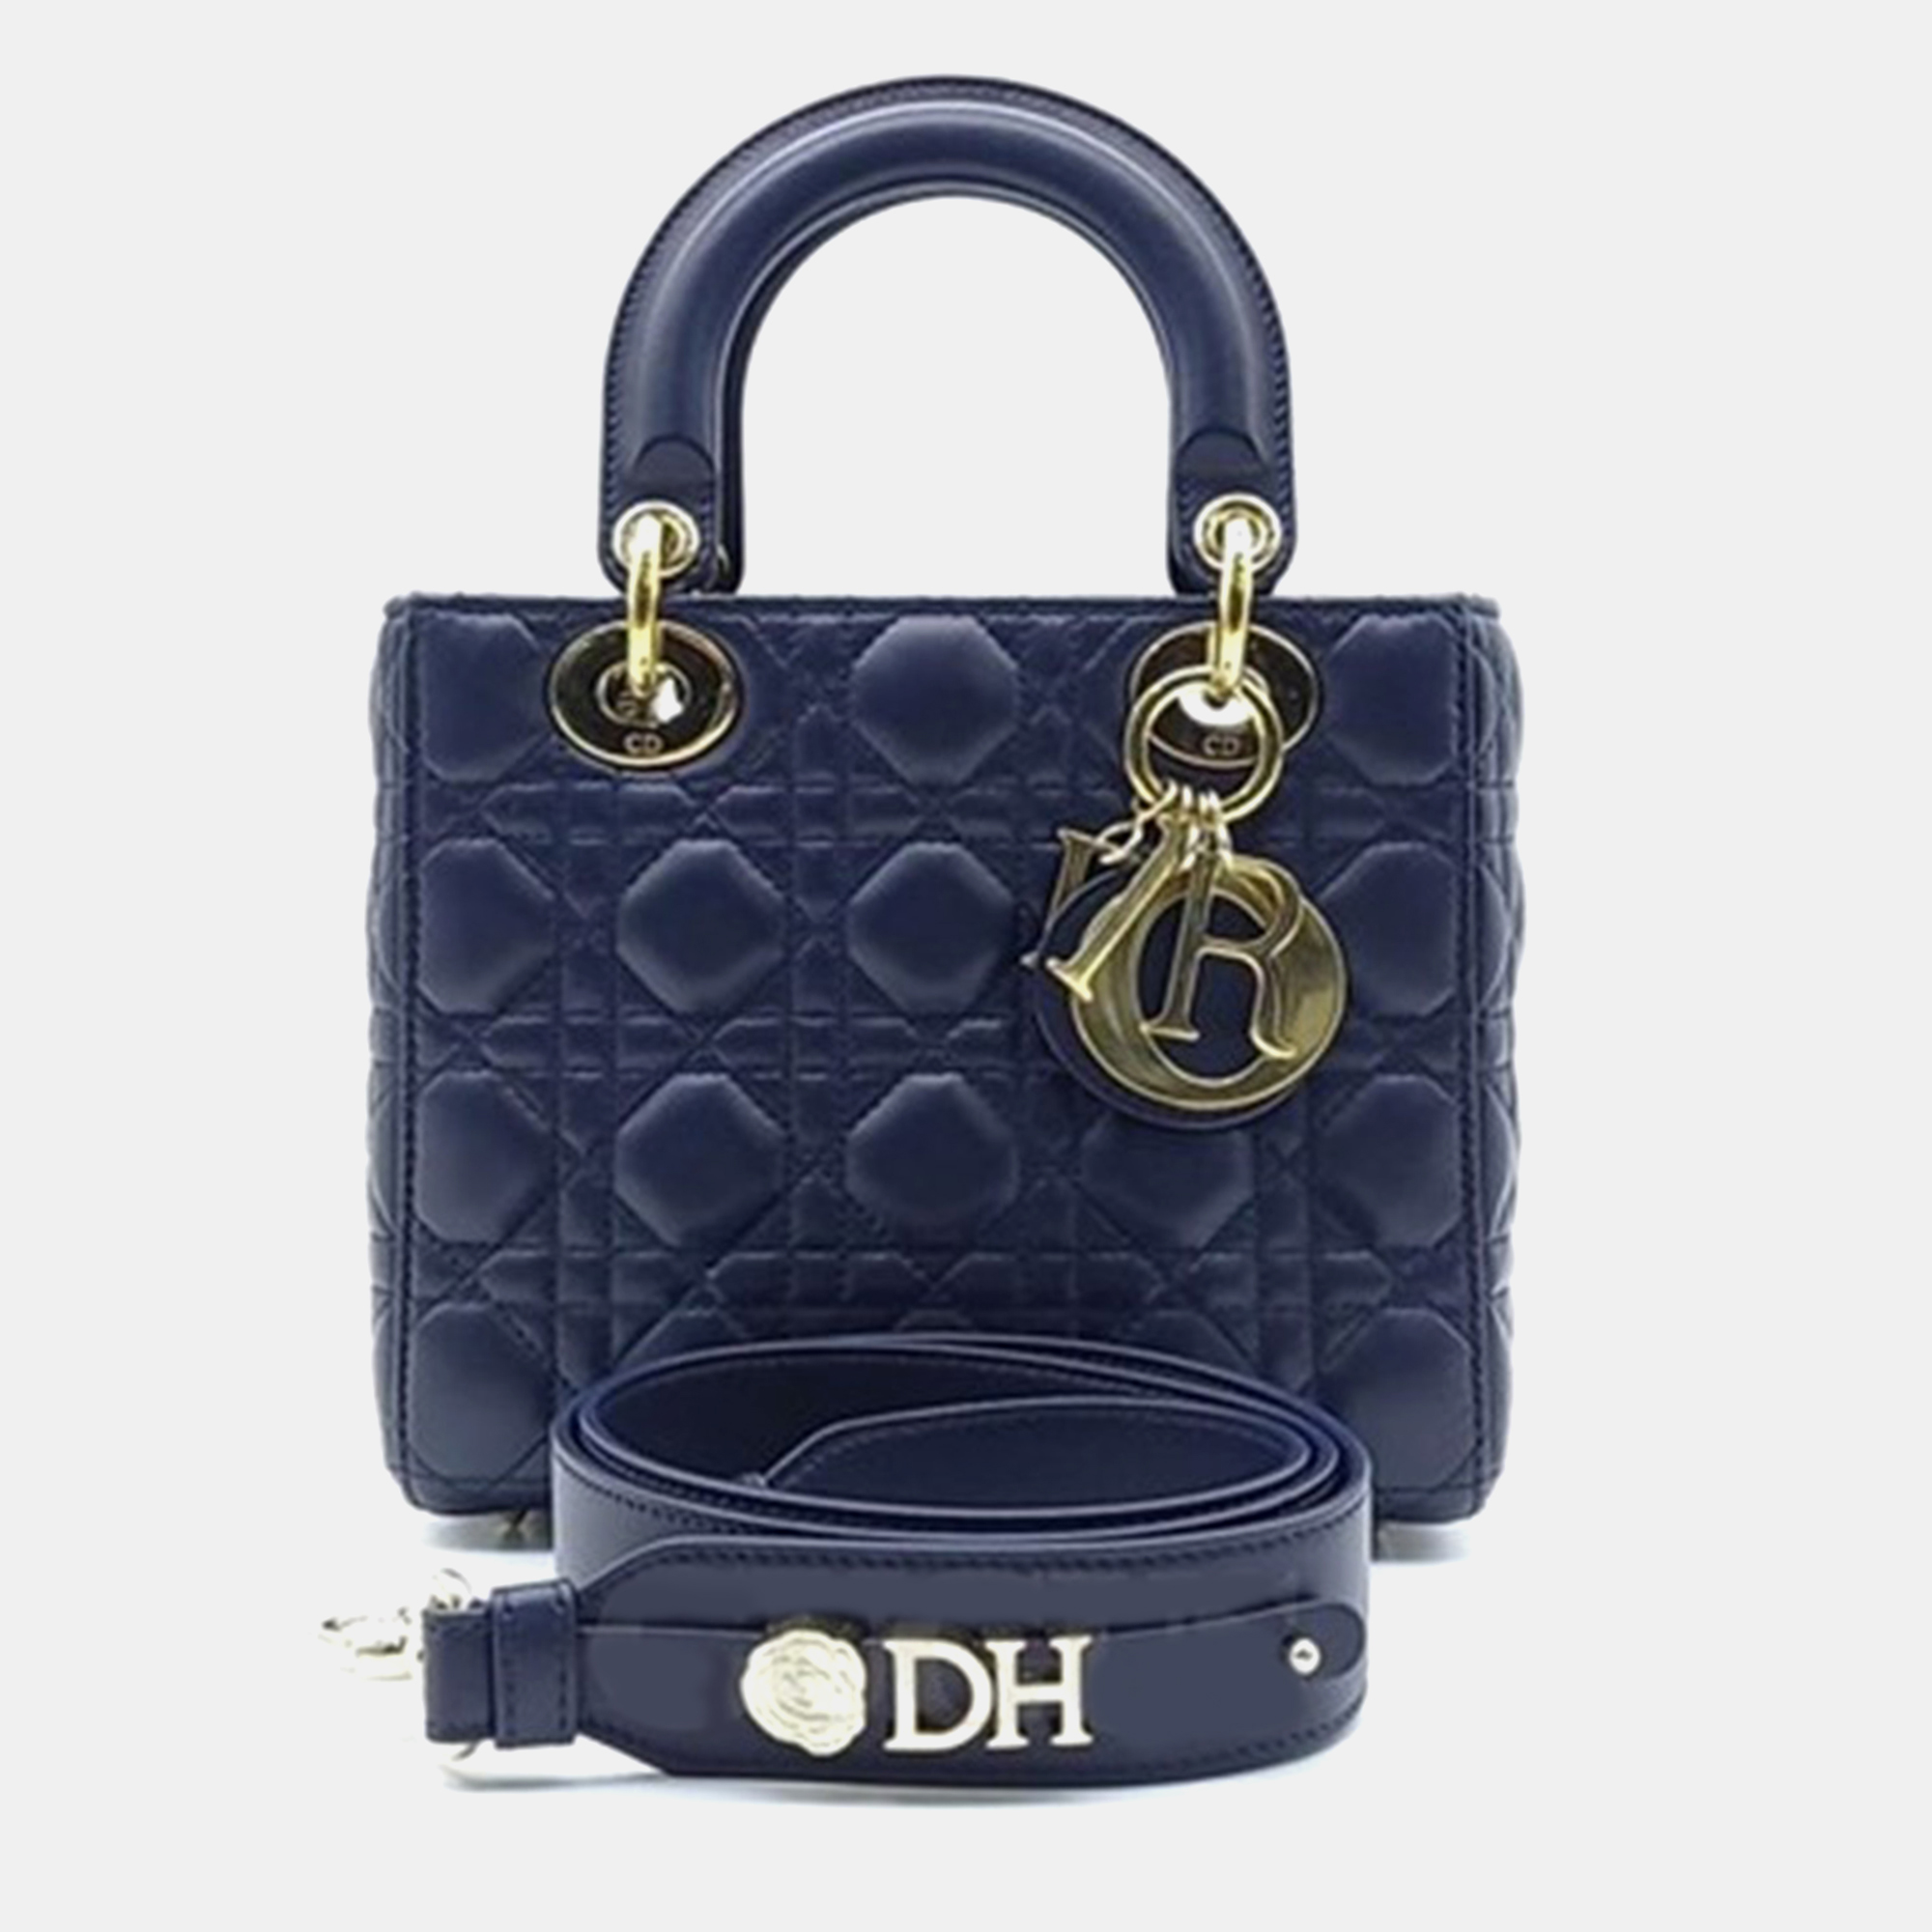 Dior blue leather small lady dior tote bag